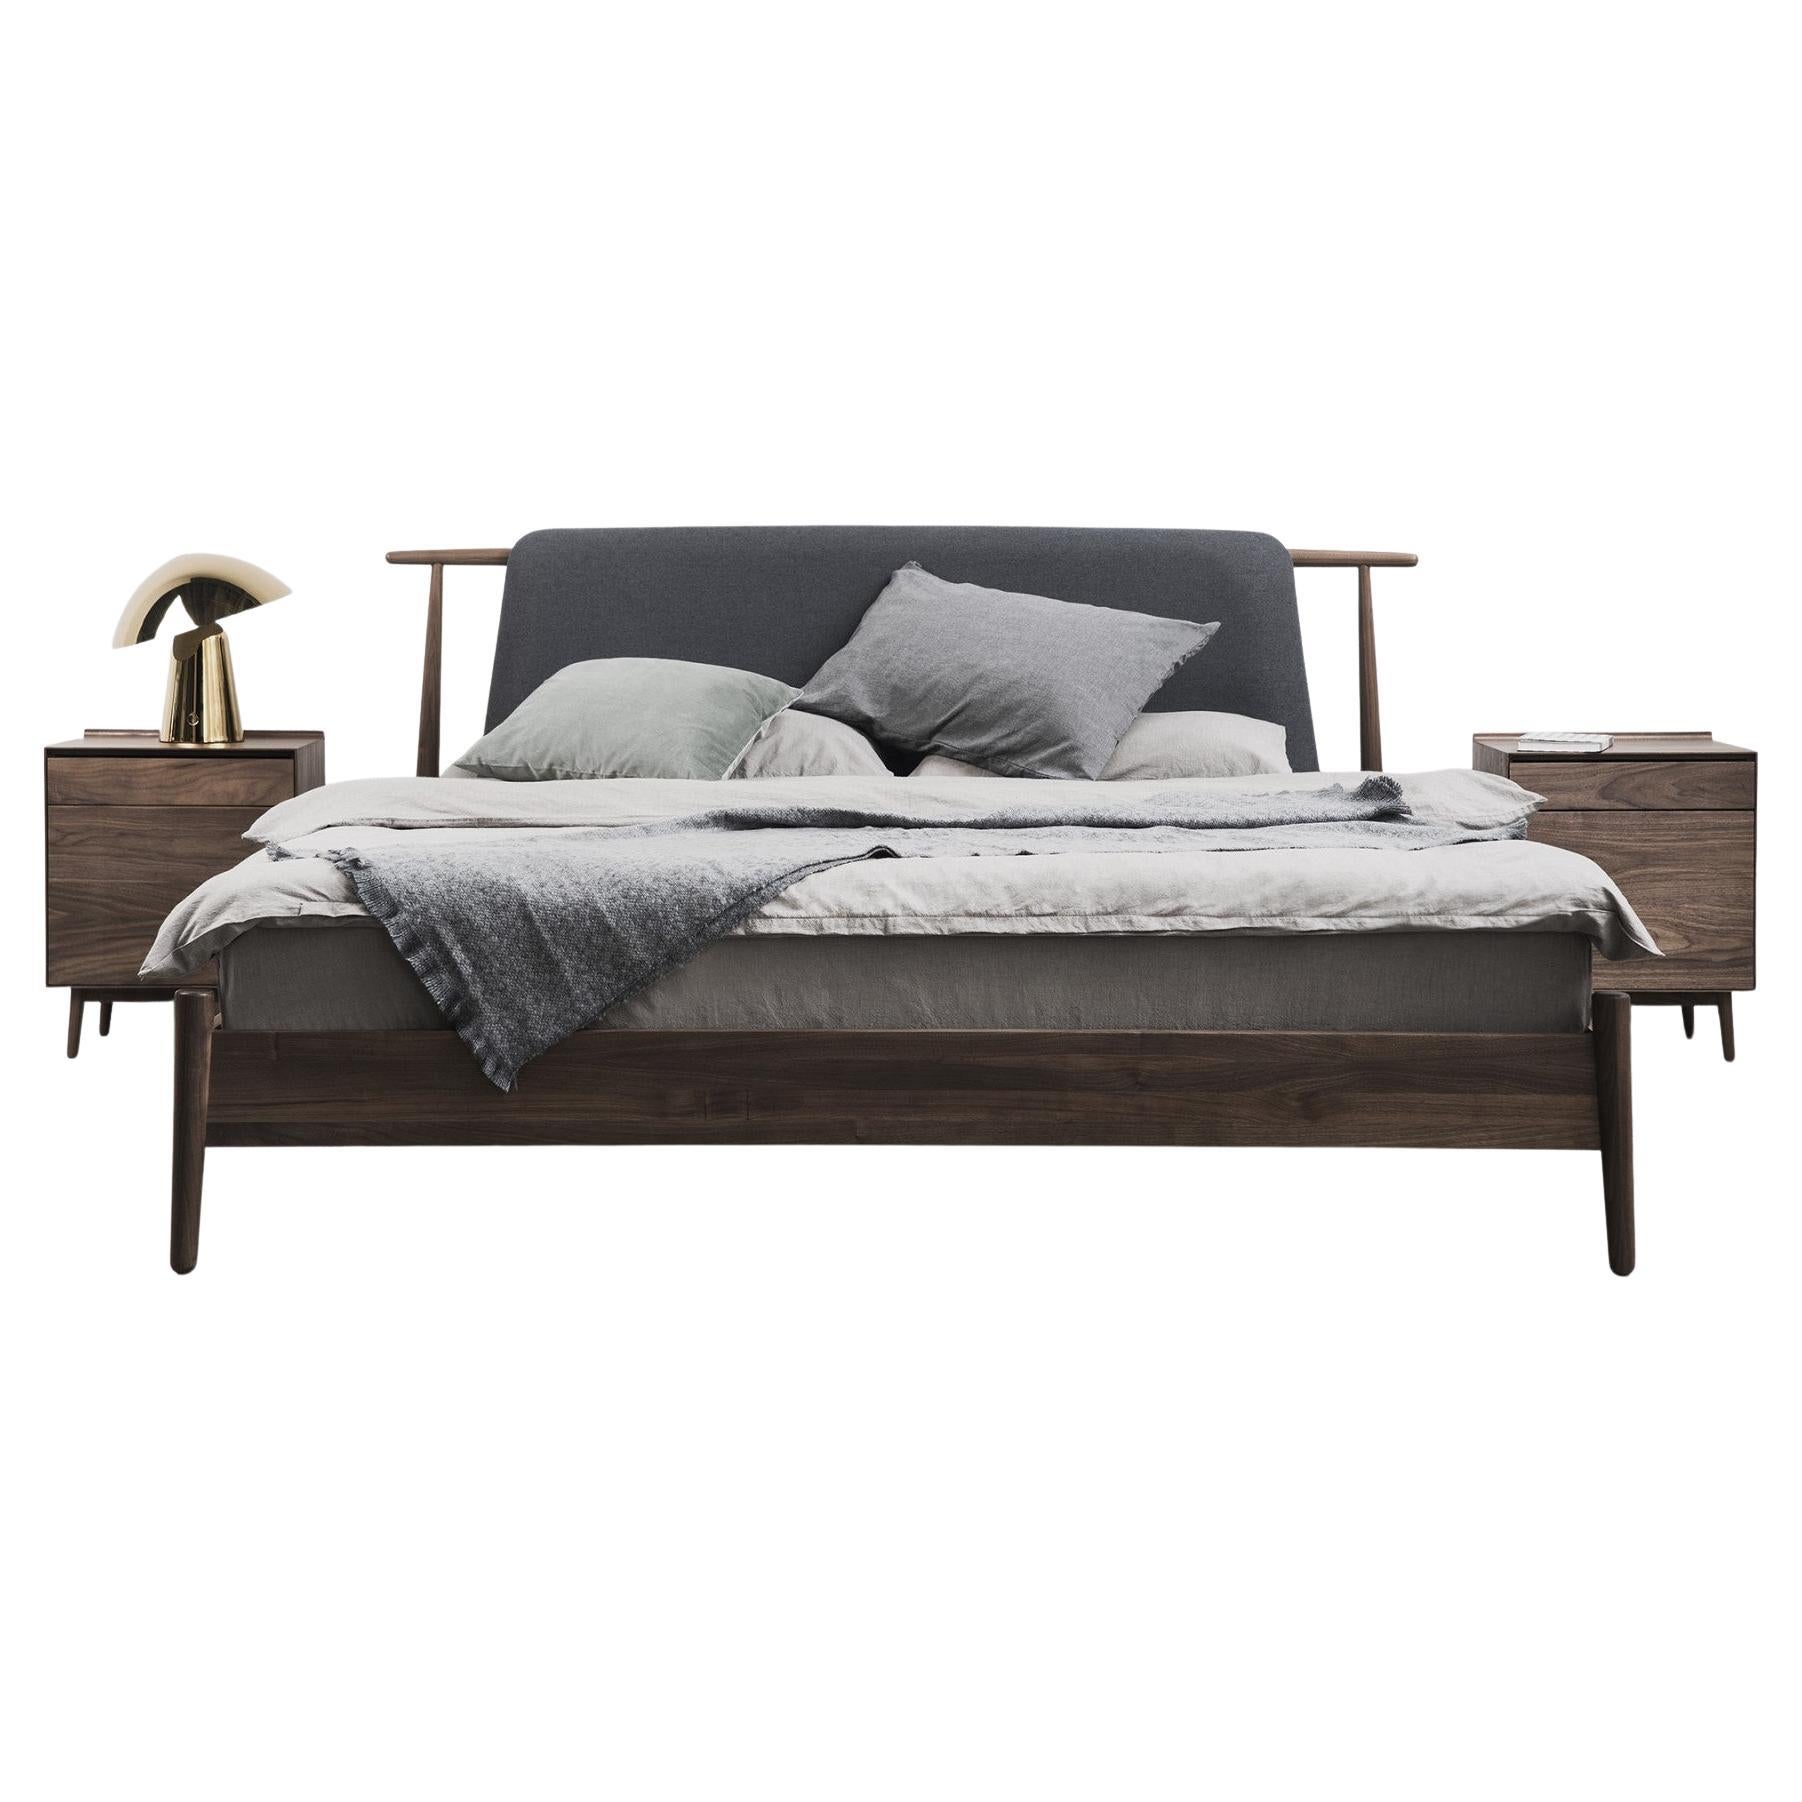 The Eaves Bed Frame takes inspiration from the graceful curves of traditional Chinese roof architecture. This sophisticated piece is crafted with the enduring strength of FAS-grade American walnut, which is further reinforced with mortise and tenon